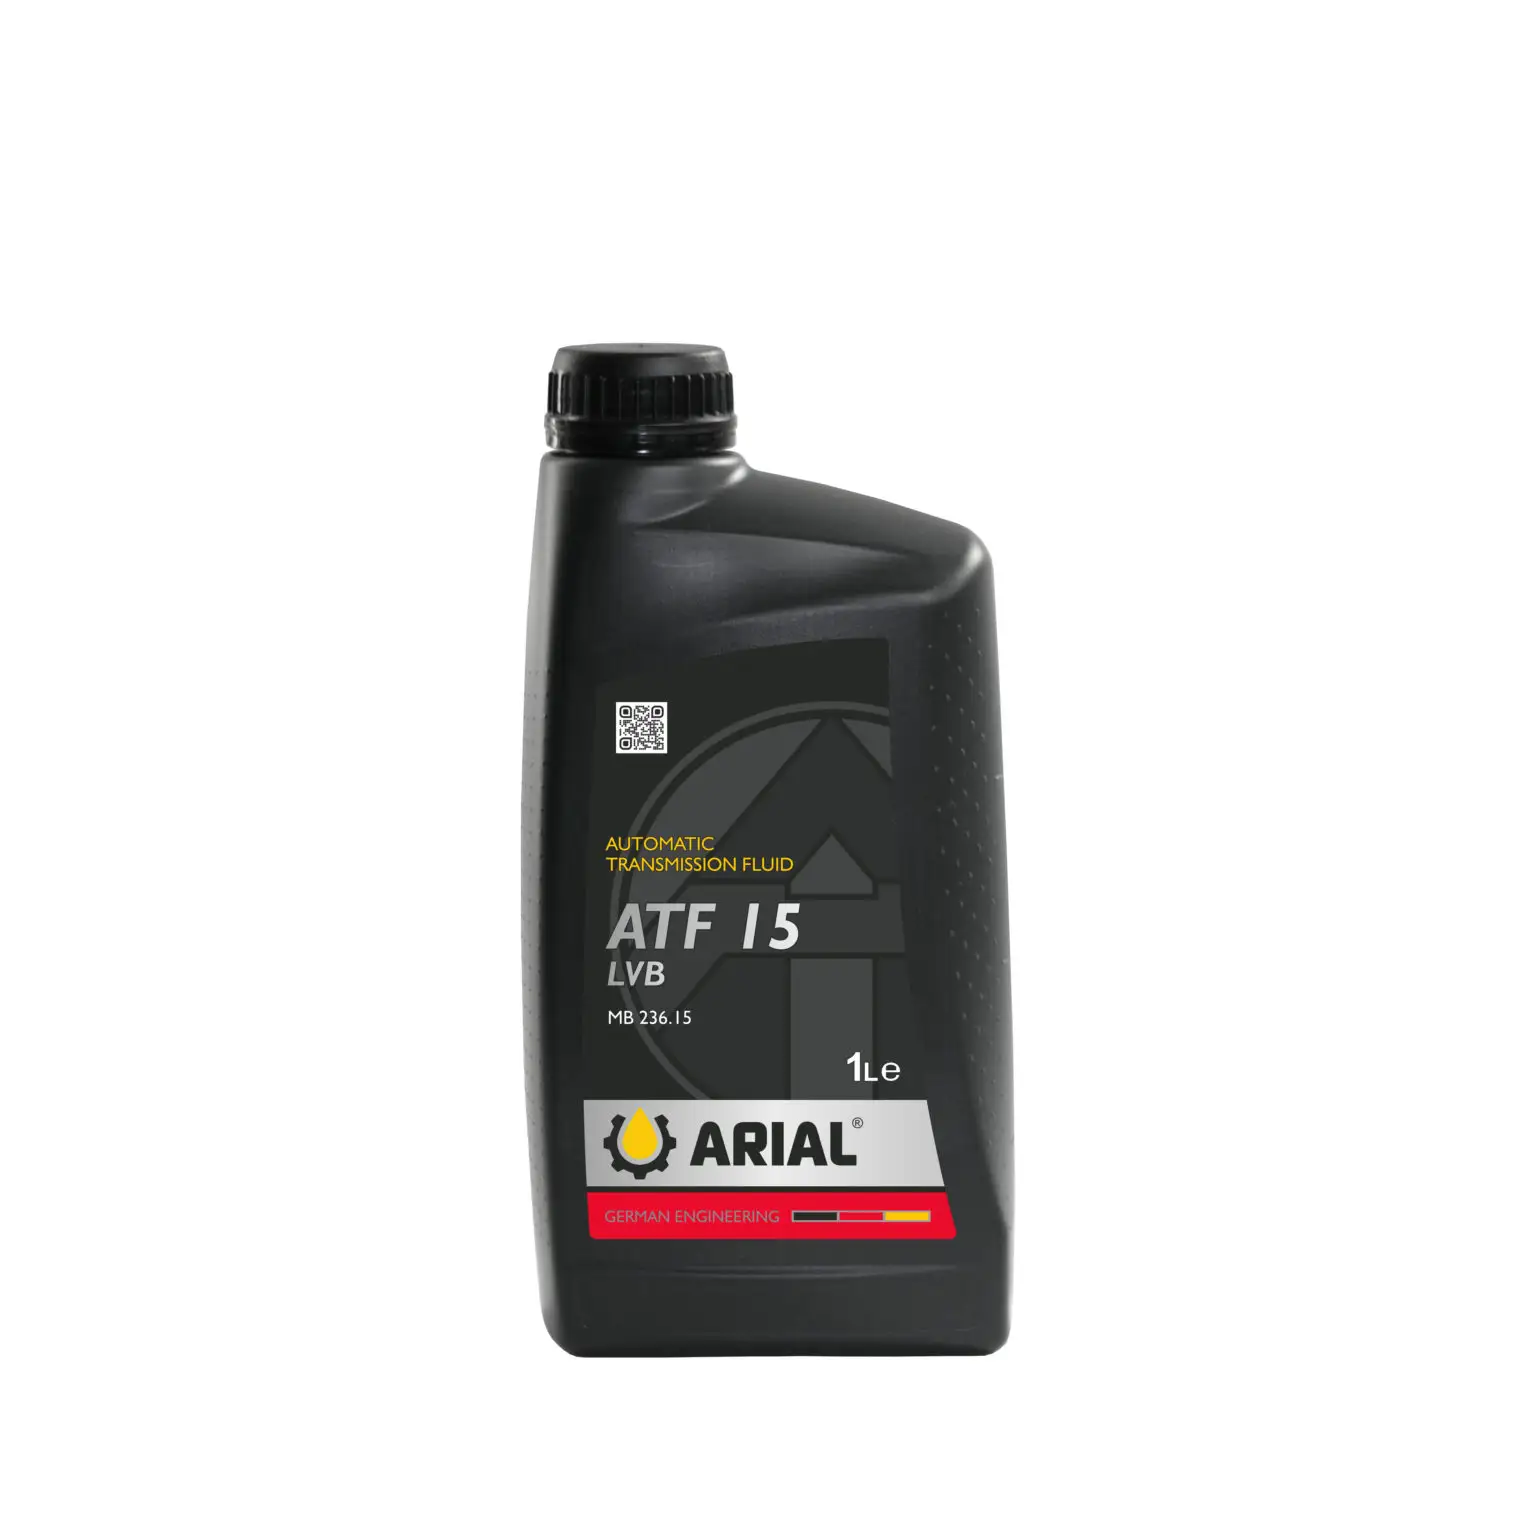 Best Selling ARIAL ATF 15 LVB Gear Oils And Transmission Fluids Premium Synthetic Product For Fuel Saving MB 236.15